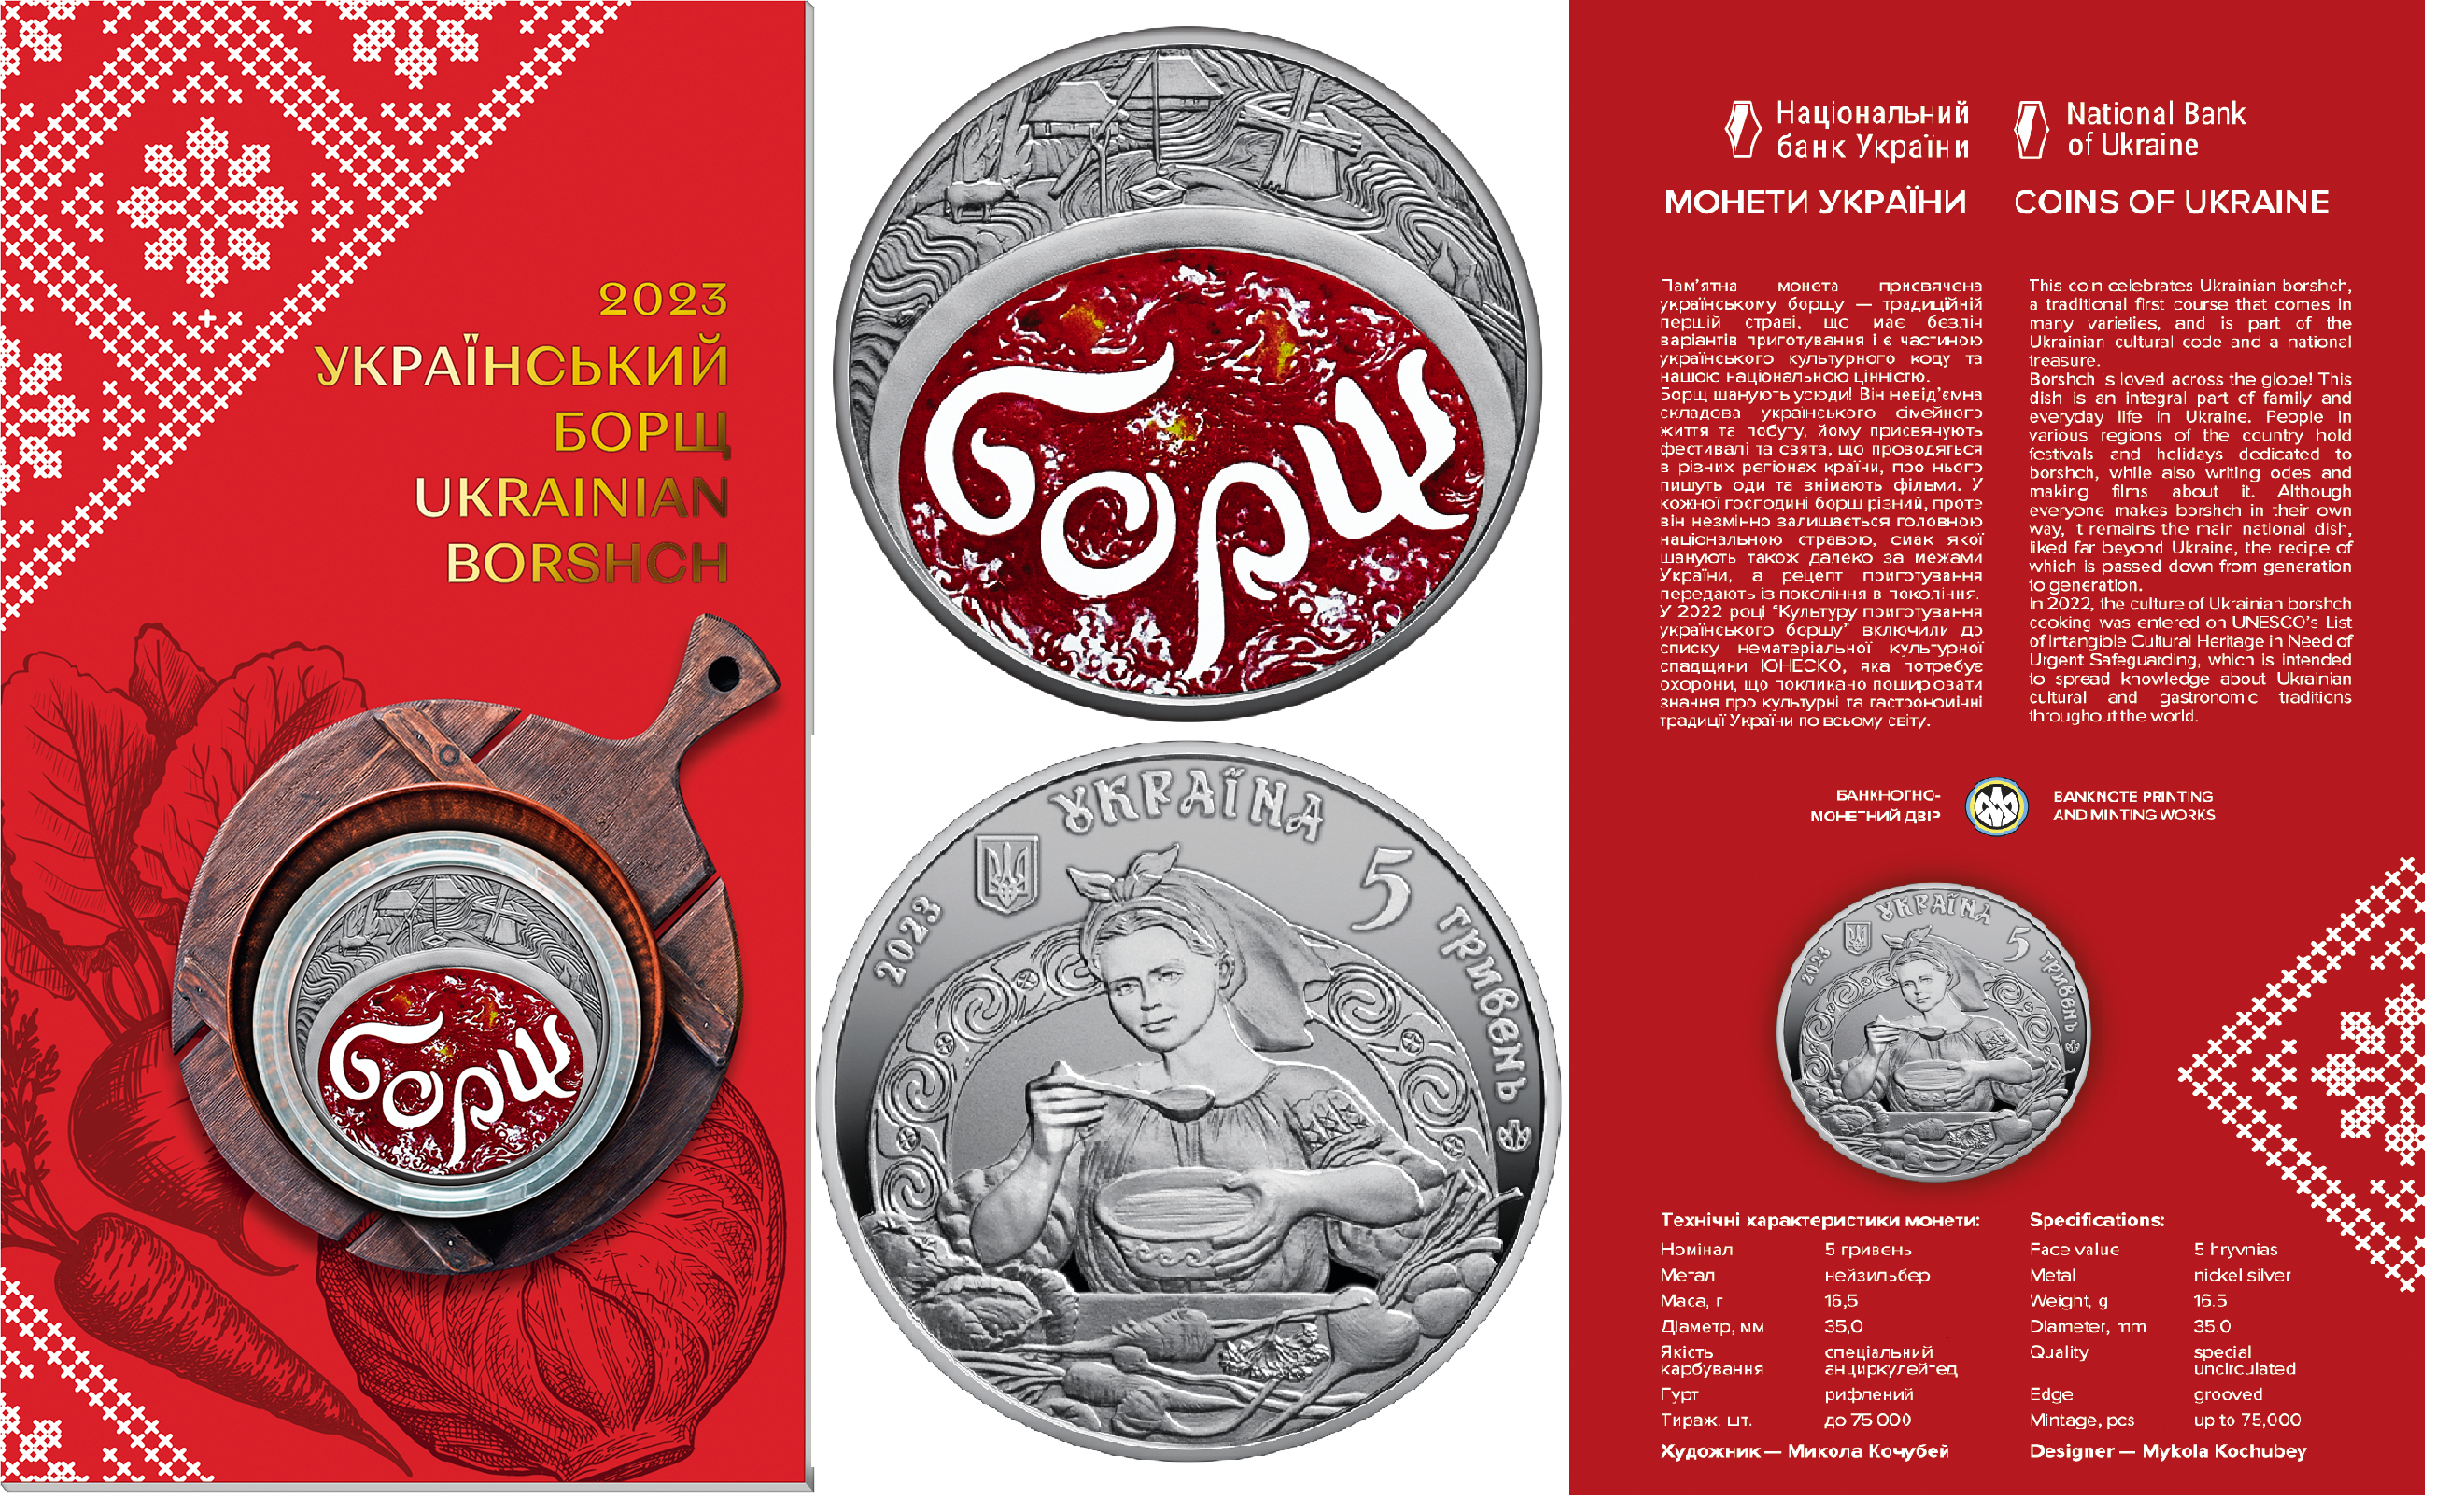 Sale of commemorative coins from MTB BANK • buy commemorative coins in Ukraine at MTB BANK - photo 6 - mtb.ua